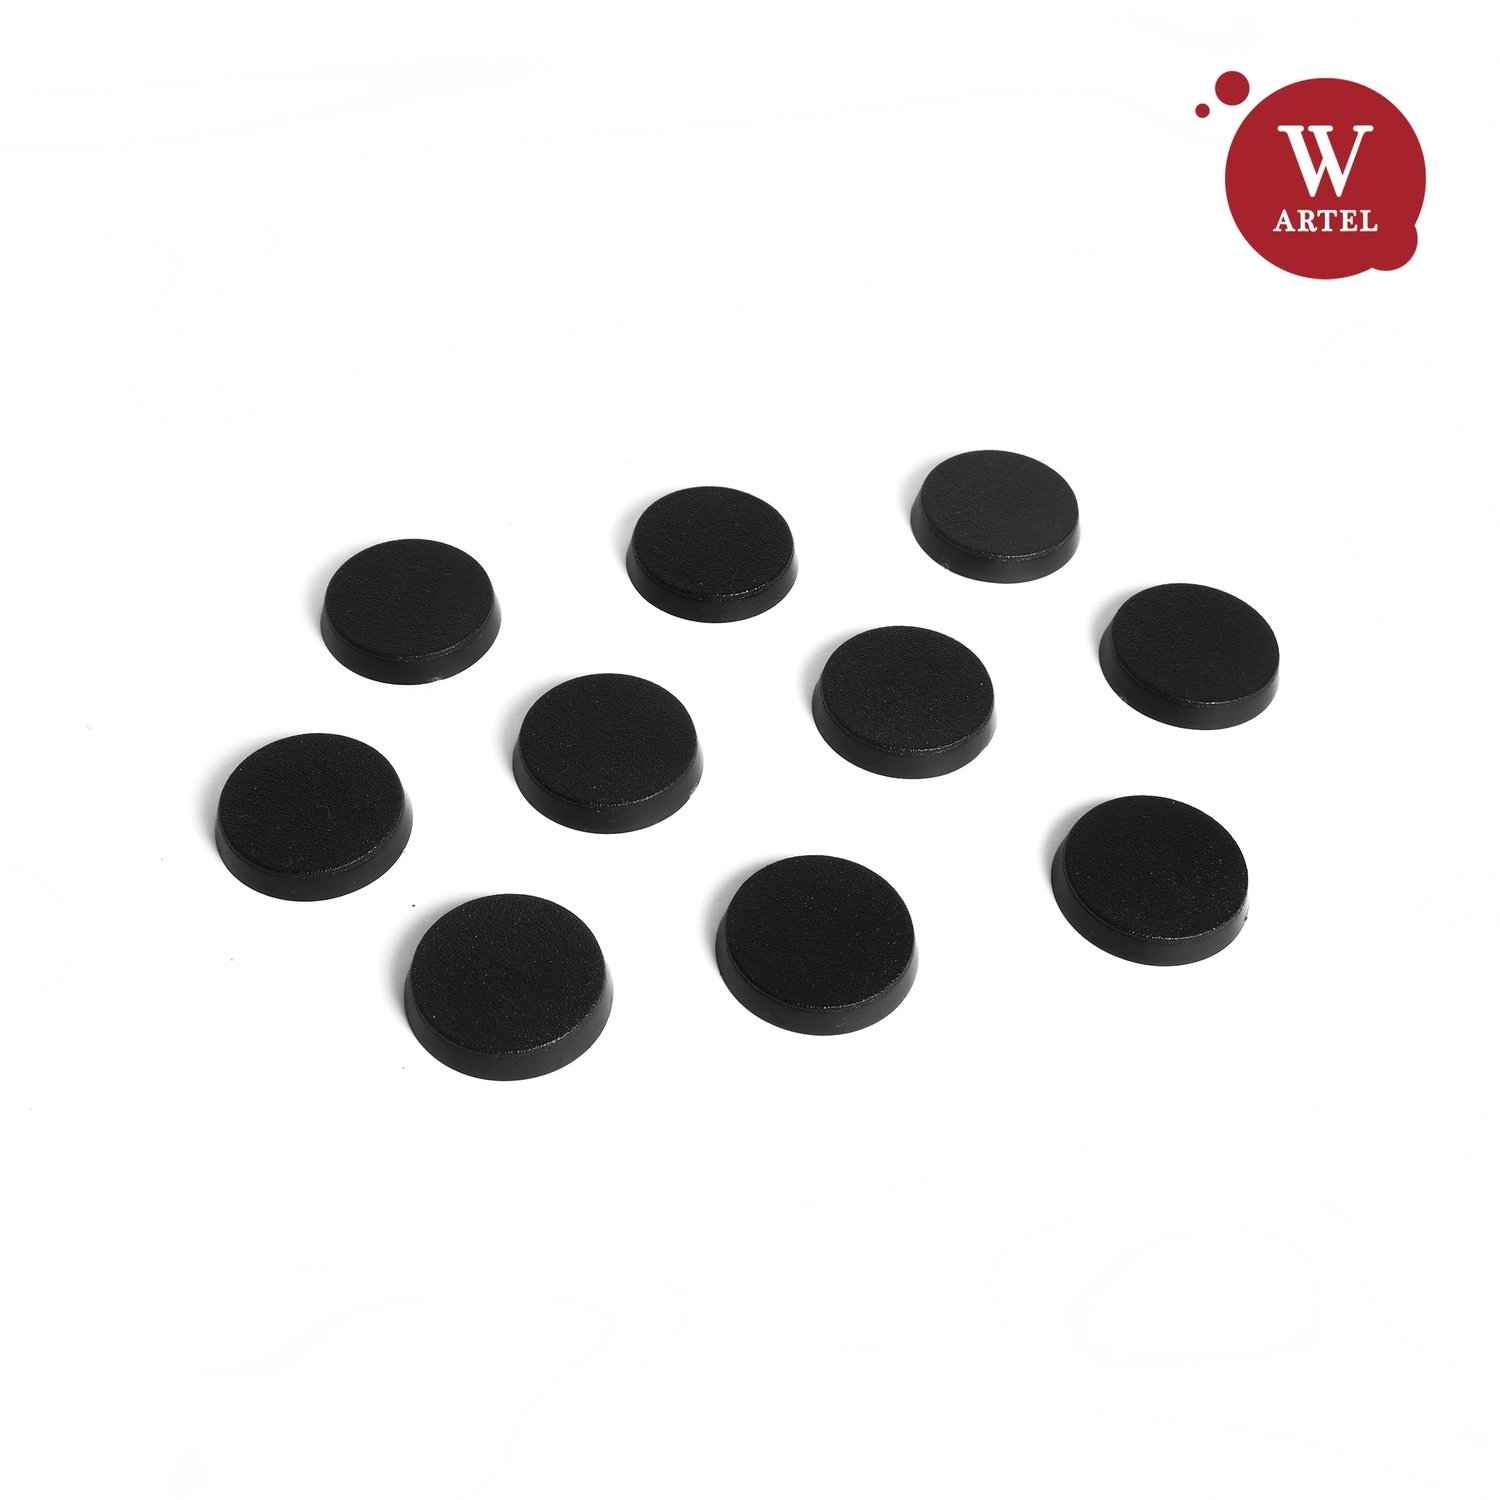 10x25mm round bases for miniatures